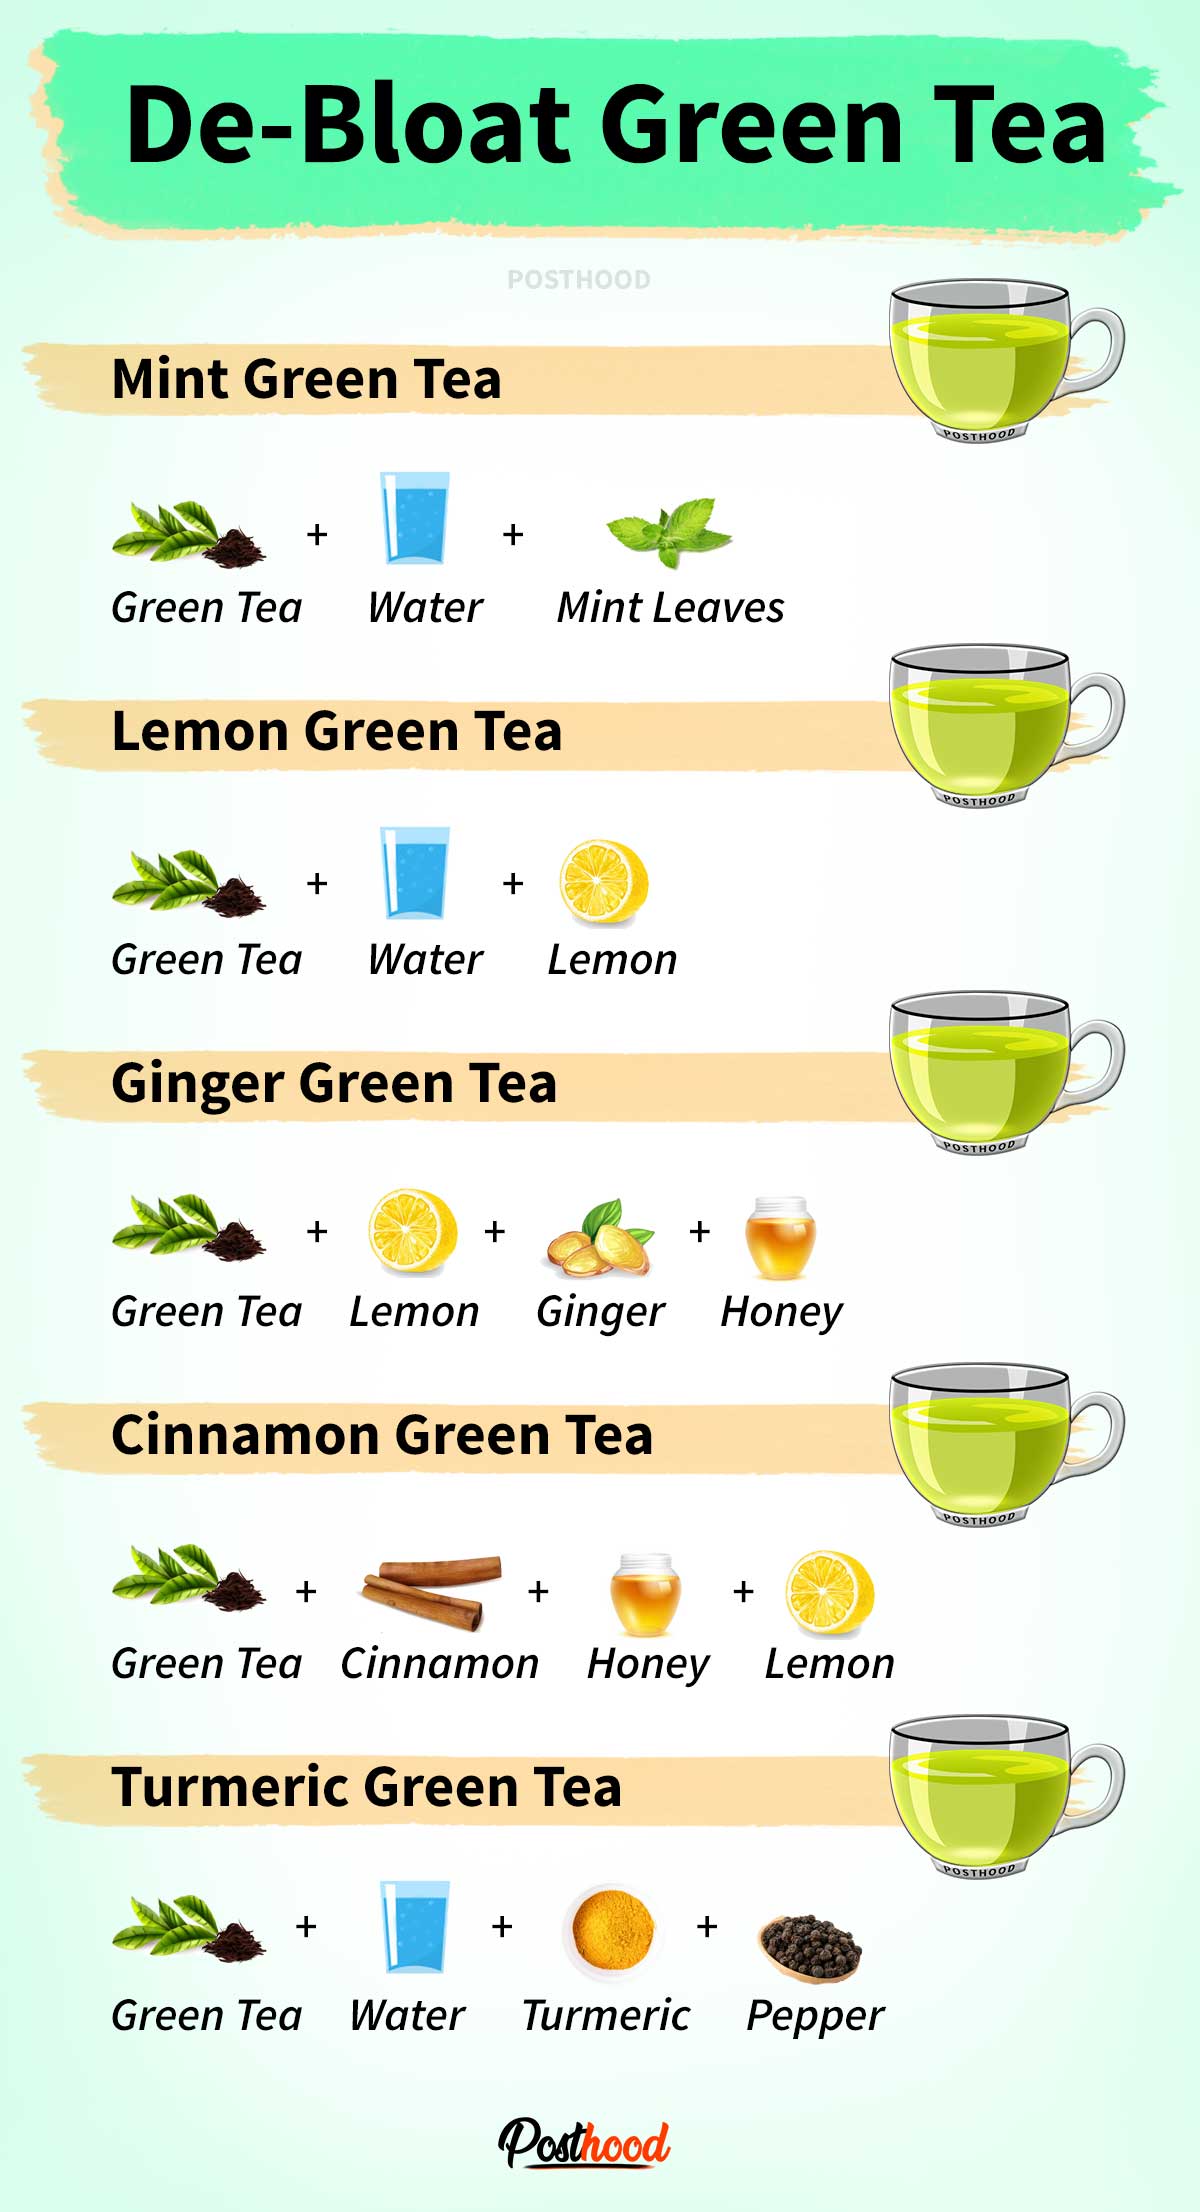 When it comes to weight loss by herbal tea, green tea always hits the list. Know how to take green tea for weight loss and bloating?